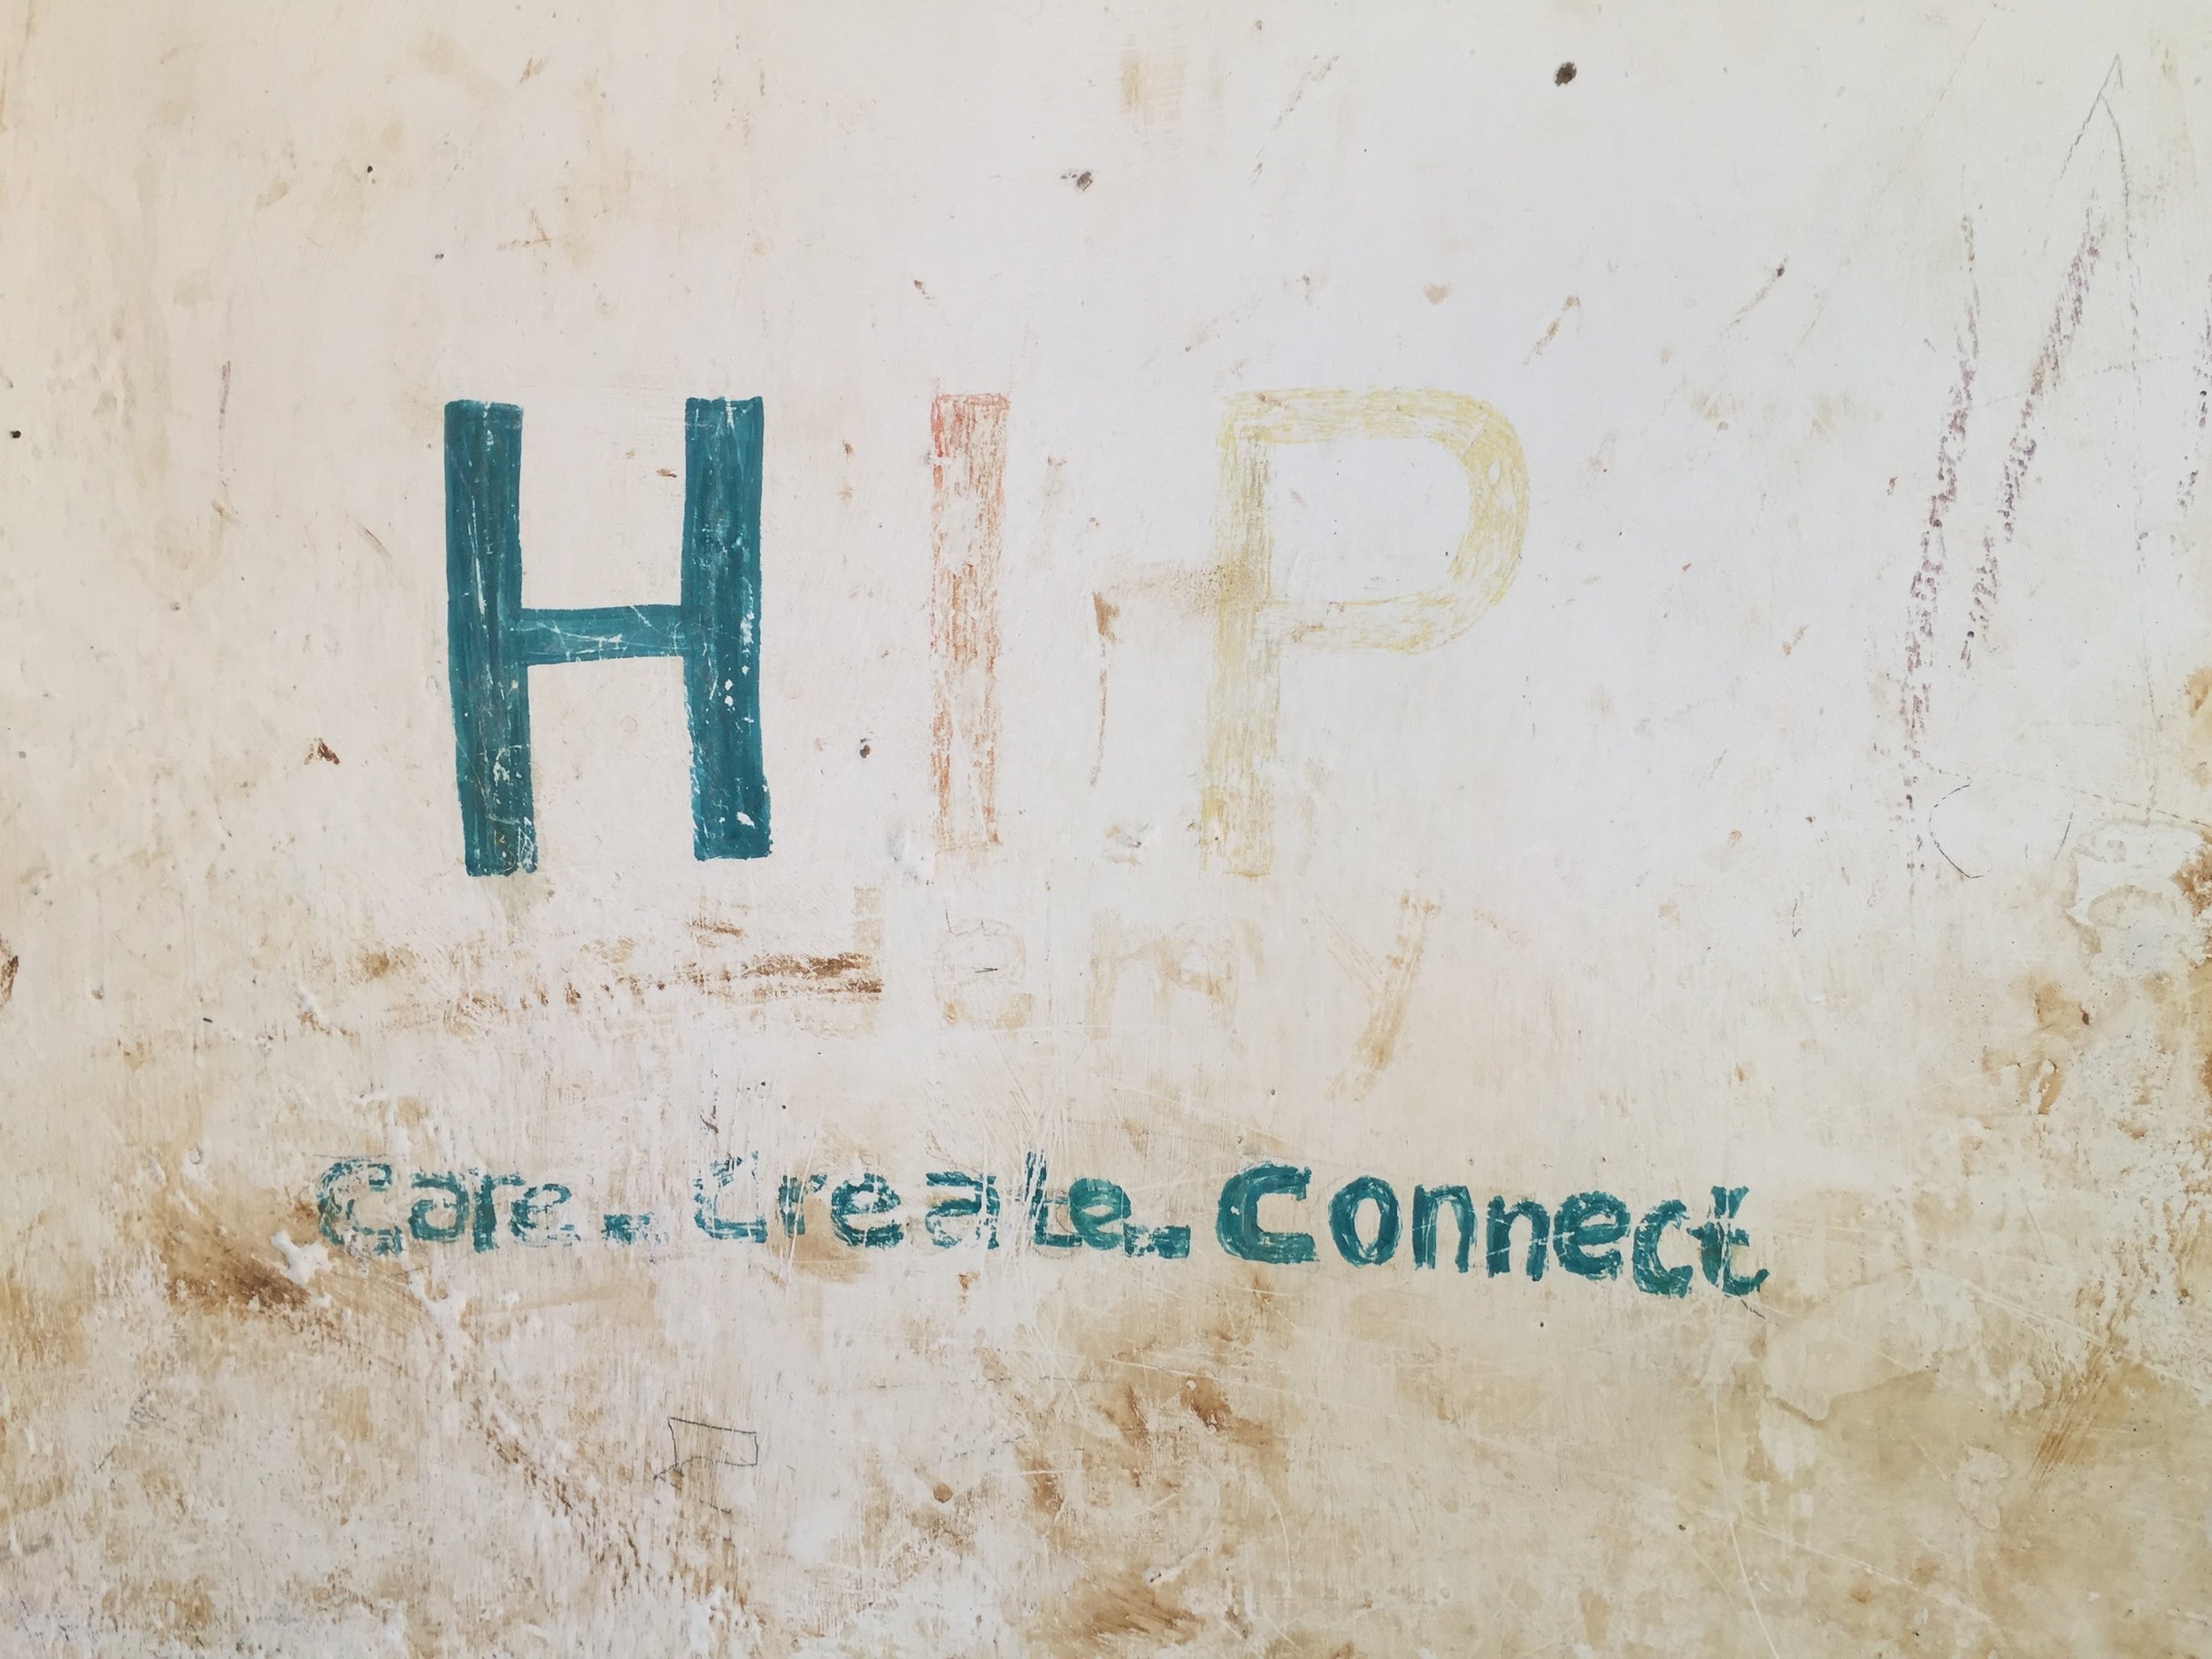  On one of the outside walls of the school was this painted sign with "HIP" written on it as well as a school motto: "Care. Create. Connect". Both were starting to fade from time and weather. 